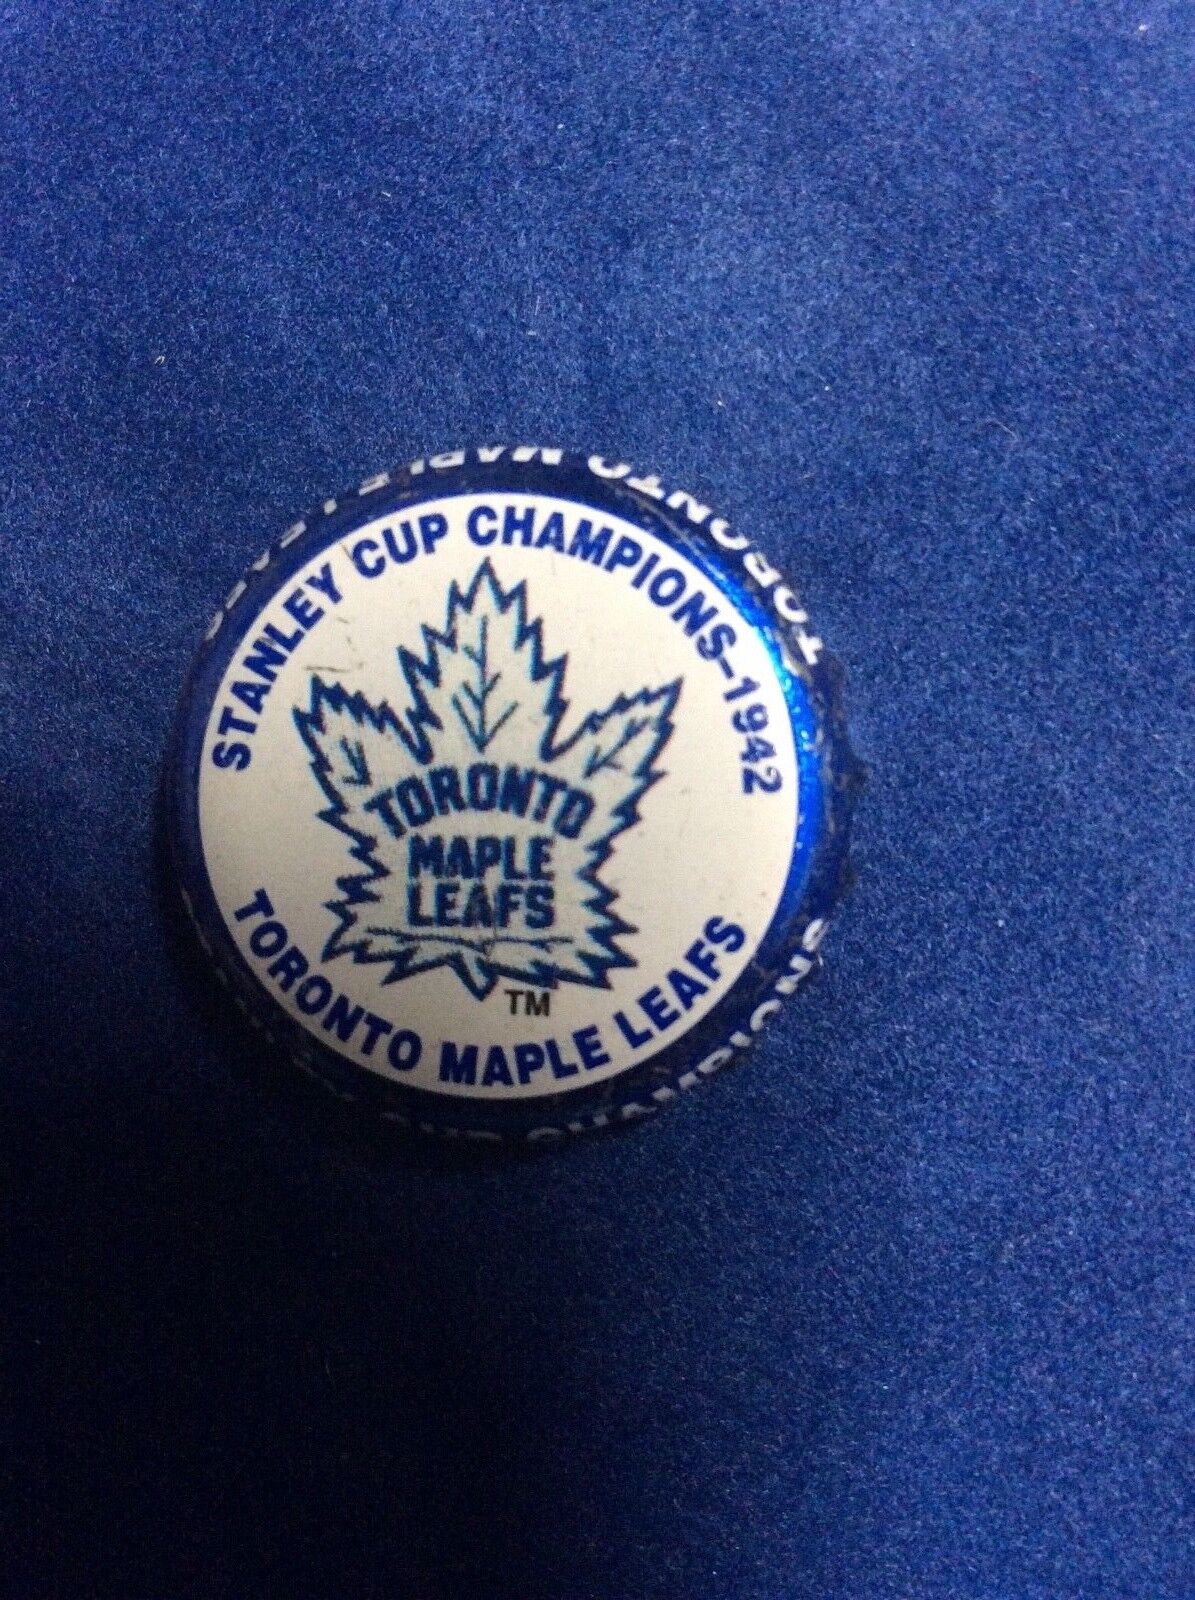 Stanley Cup Toronto Maple Leafs 1942 Limited Edition NHL Labatts Beer Cap 2001